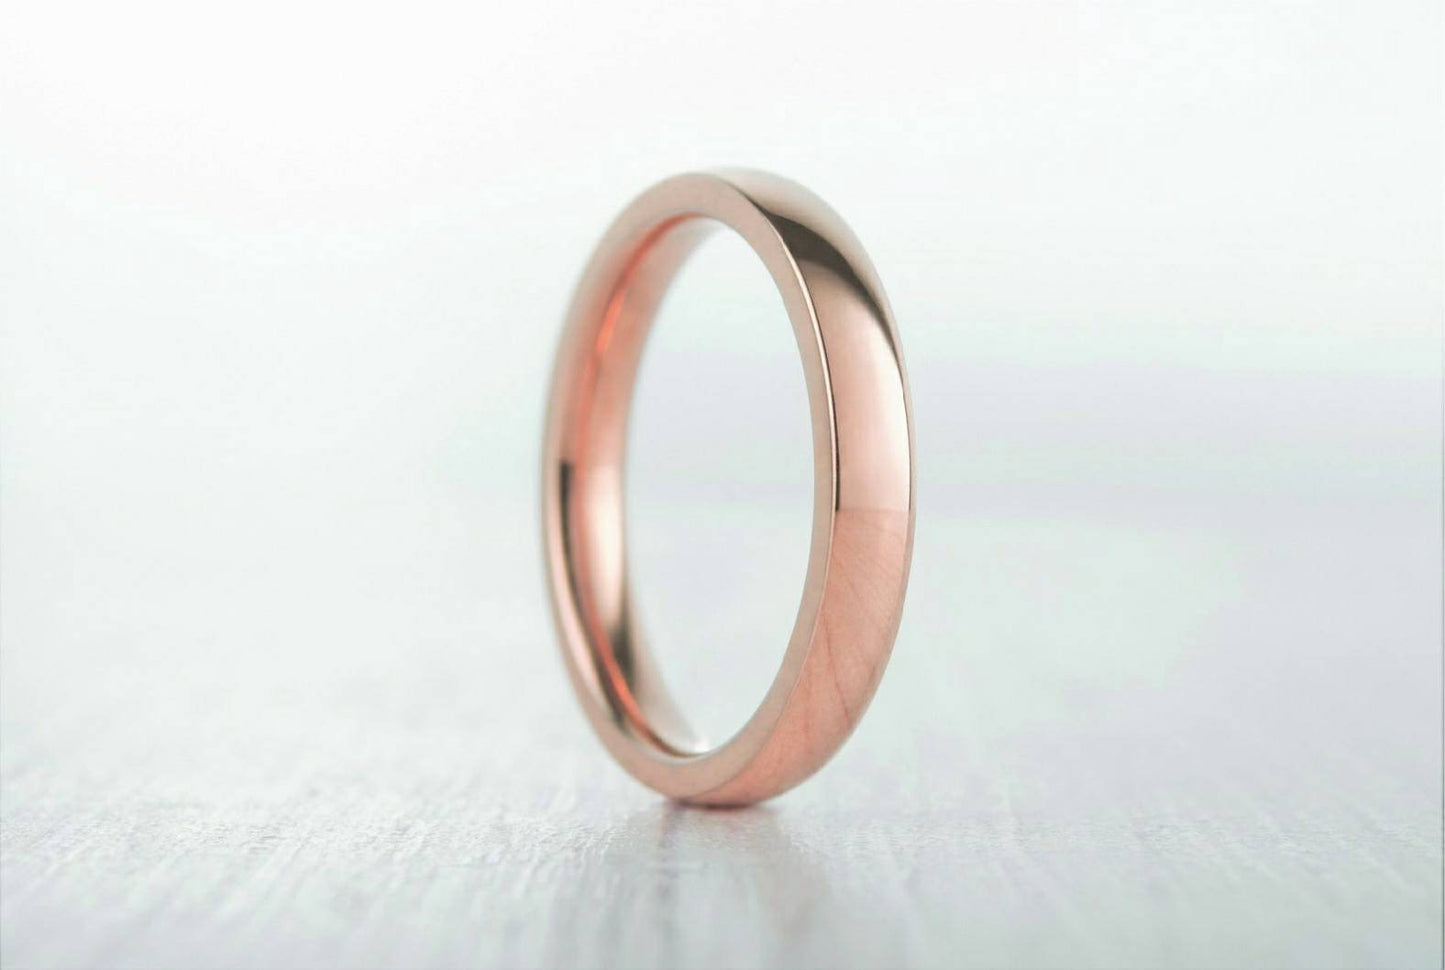 3mm Wide, filled 18ct Rose gold Plain Wedding band Ring - gold ring